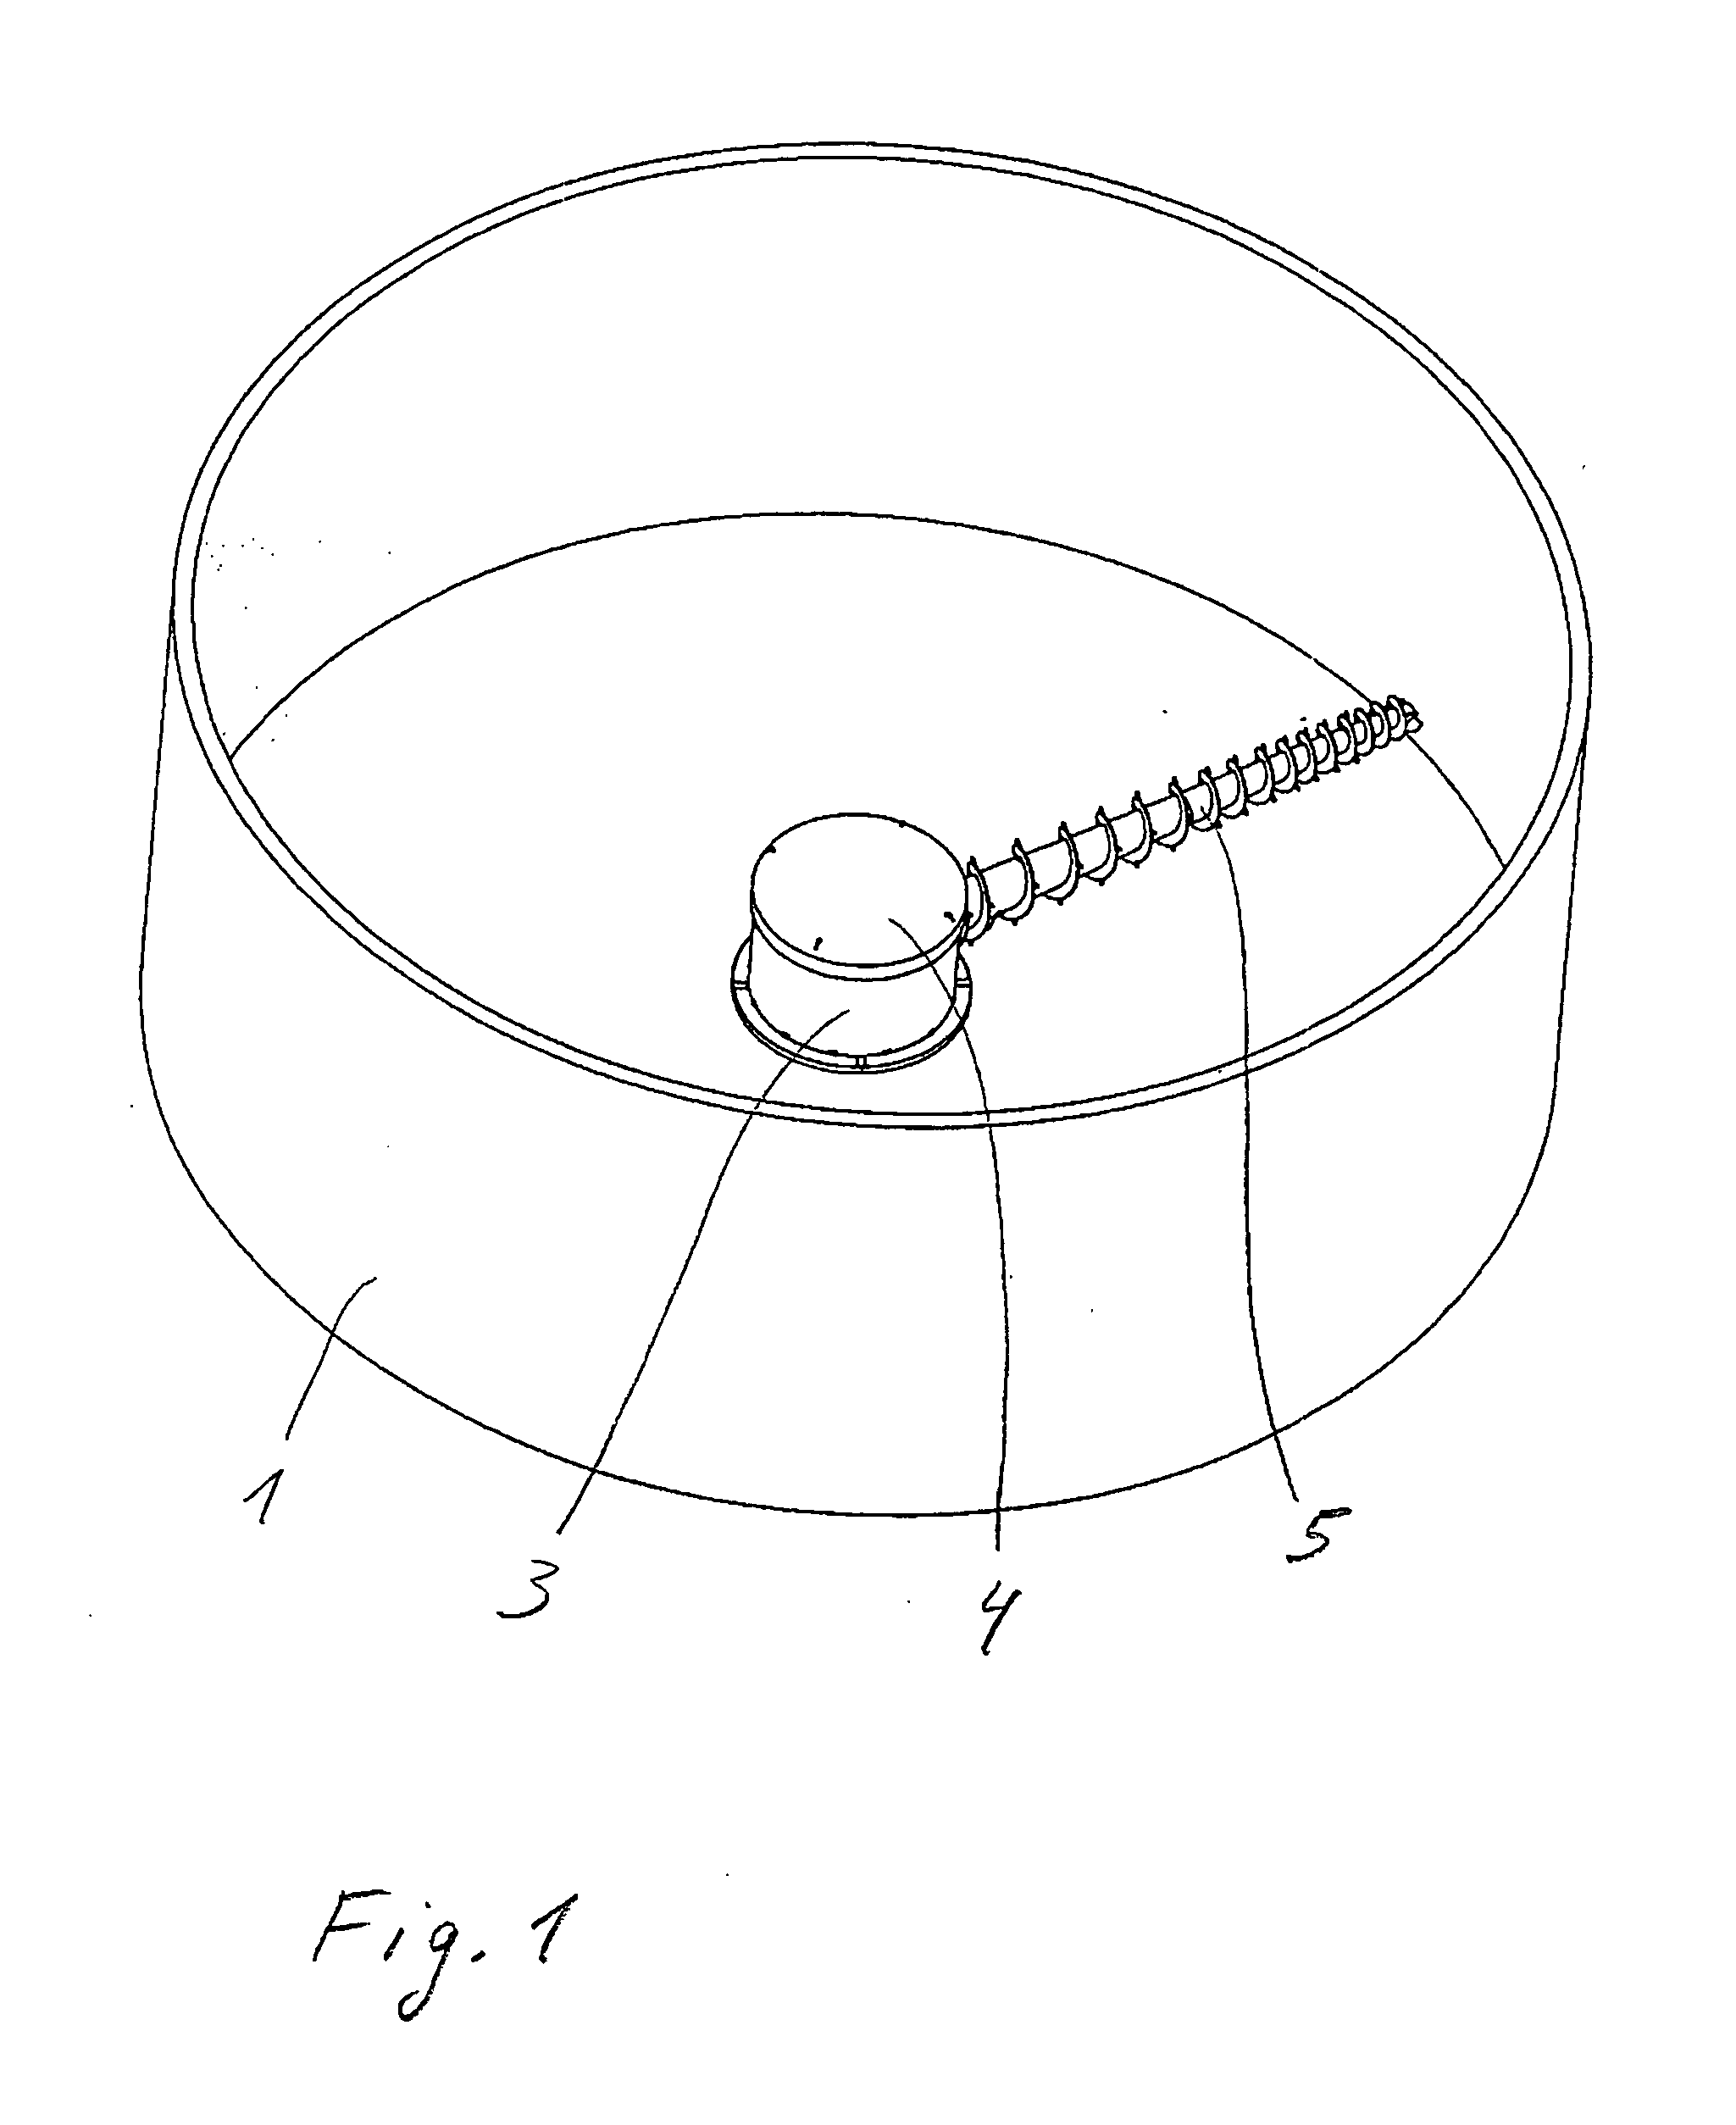 Device for conveying bulk material